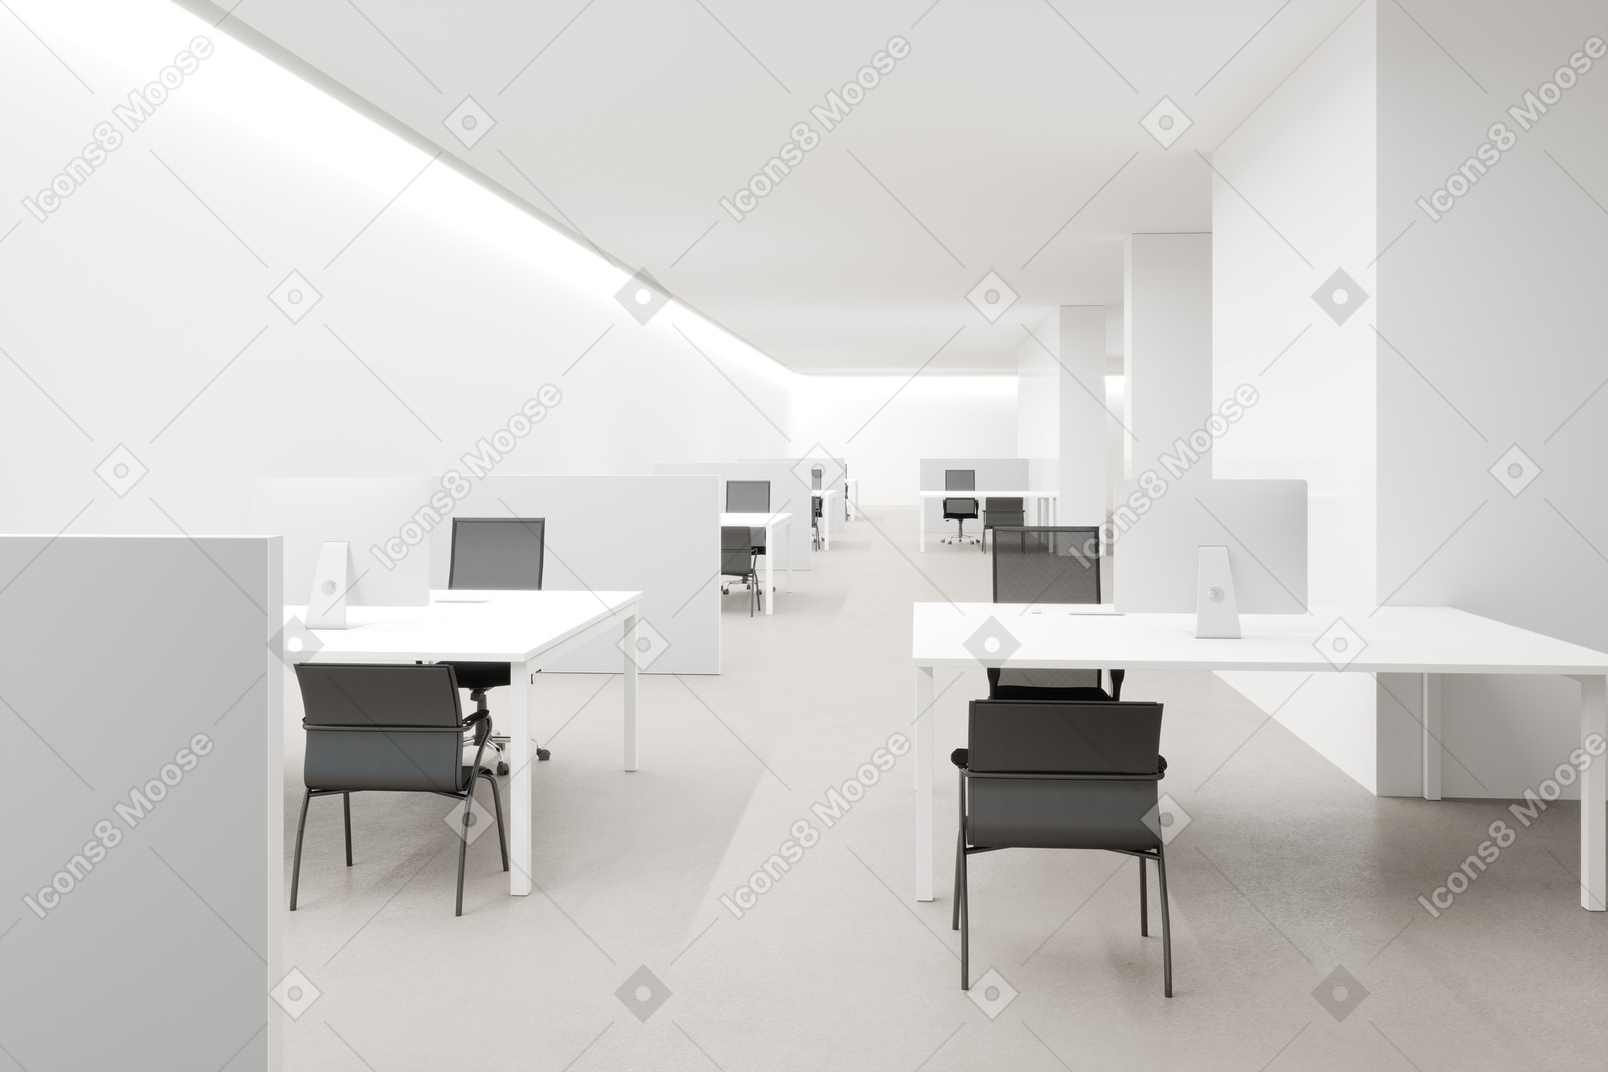 A clean white room for office workers, with cold lighting and computer desks in a row